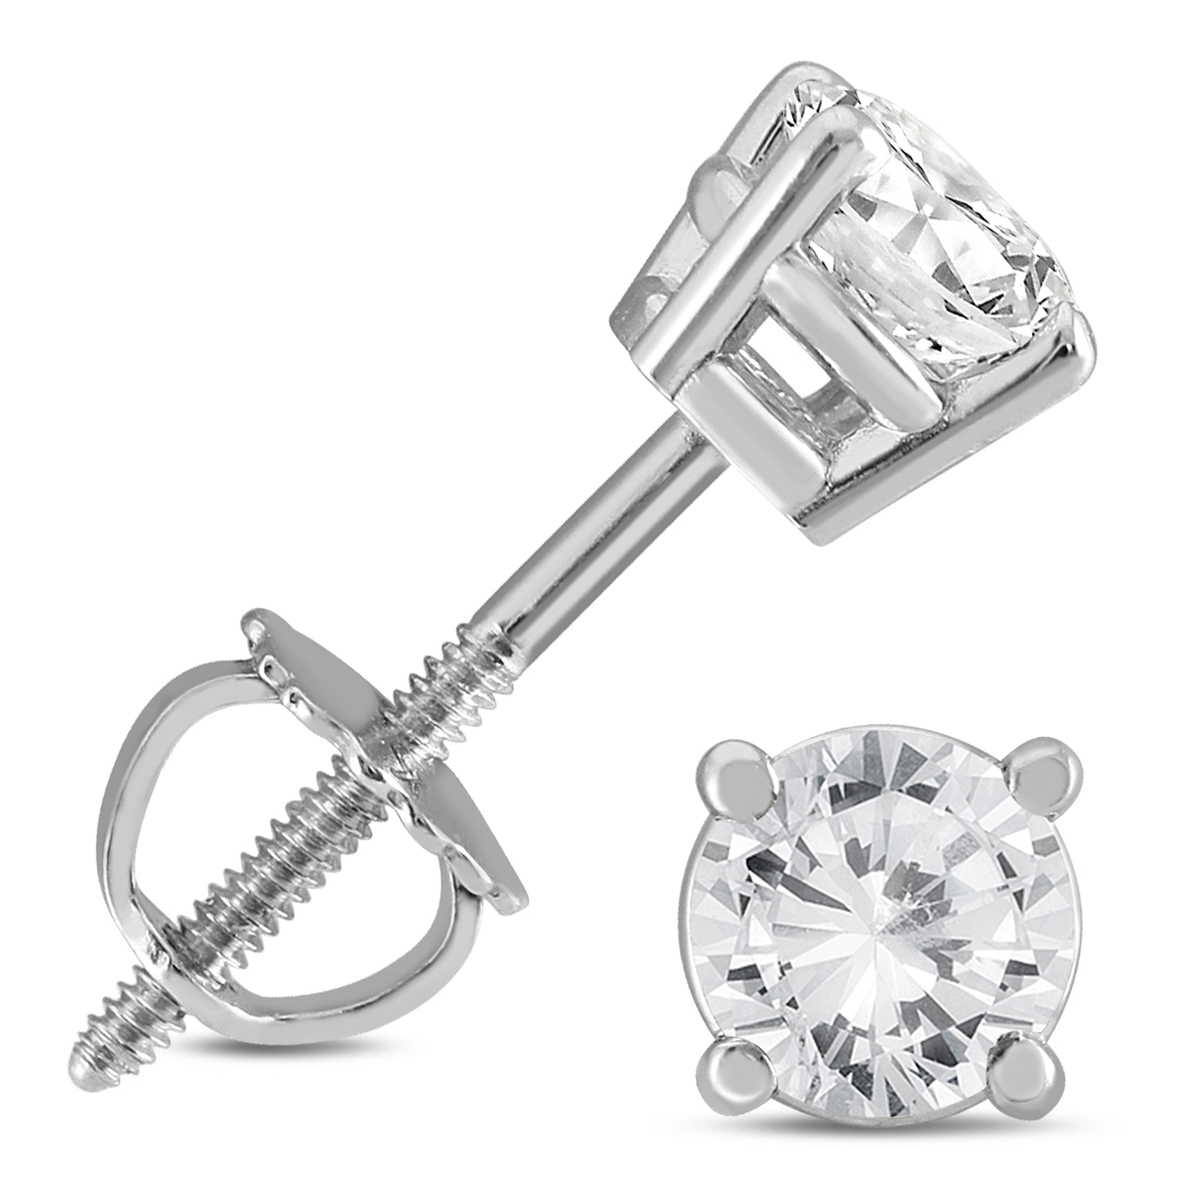 3/4 Carat TW AGS Certified Round Diamond Solitaire Stud Earrings in 14K White Gold